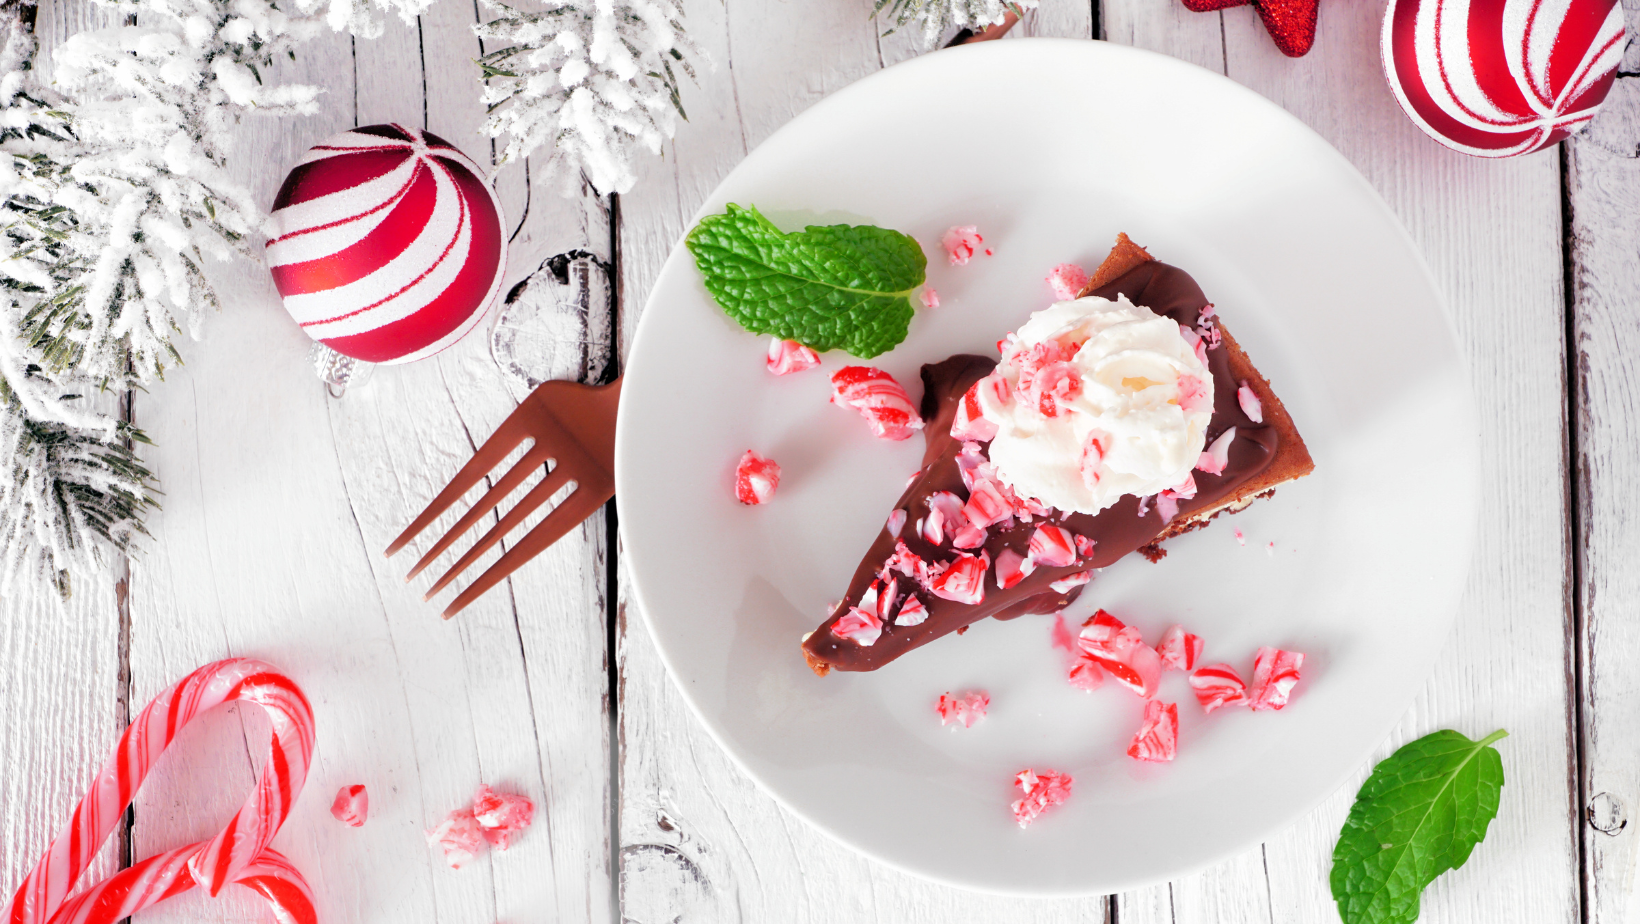 Christmas candy cane chocolate cheesecake. Top view table scene against a white wood background.